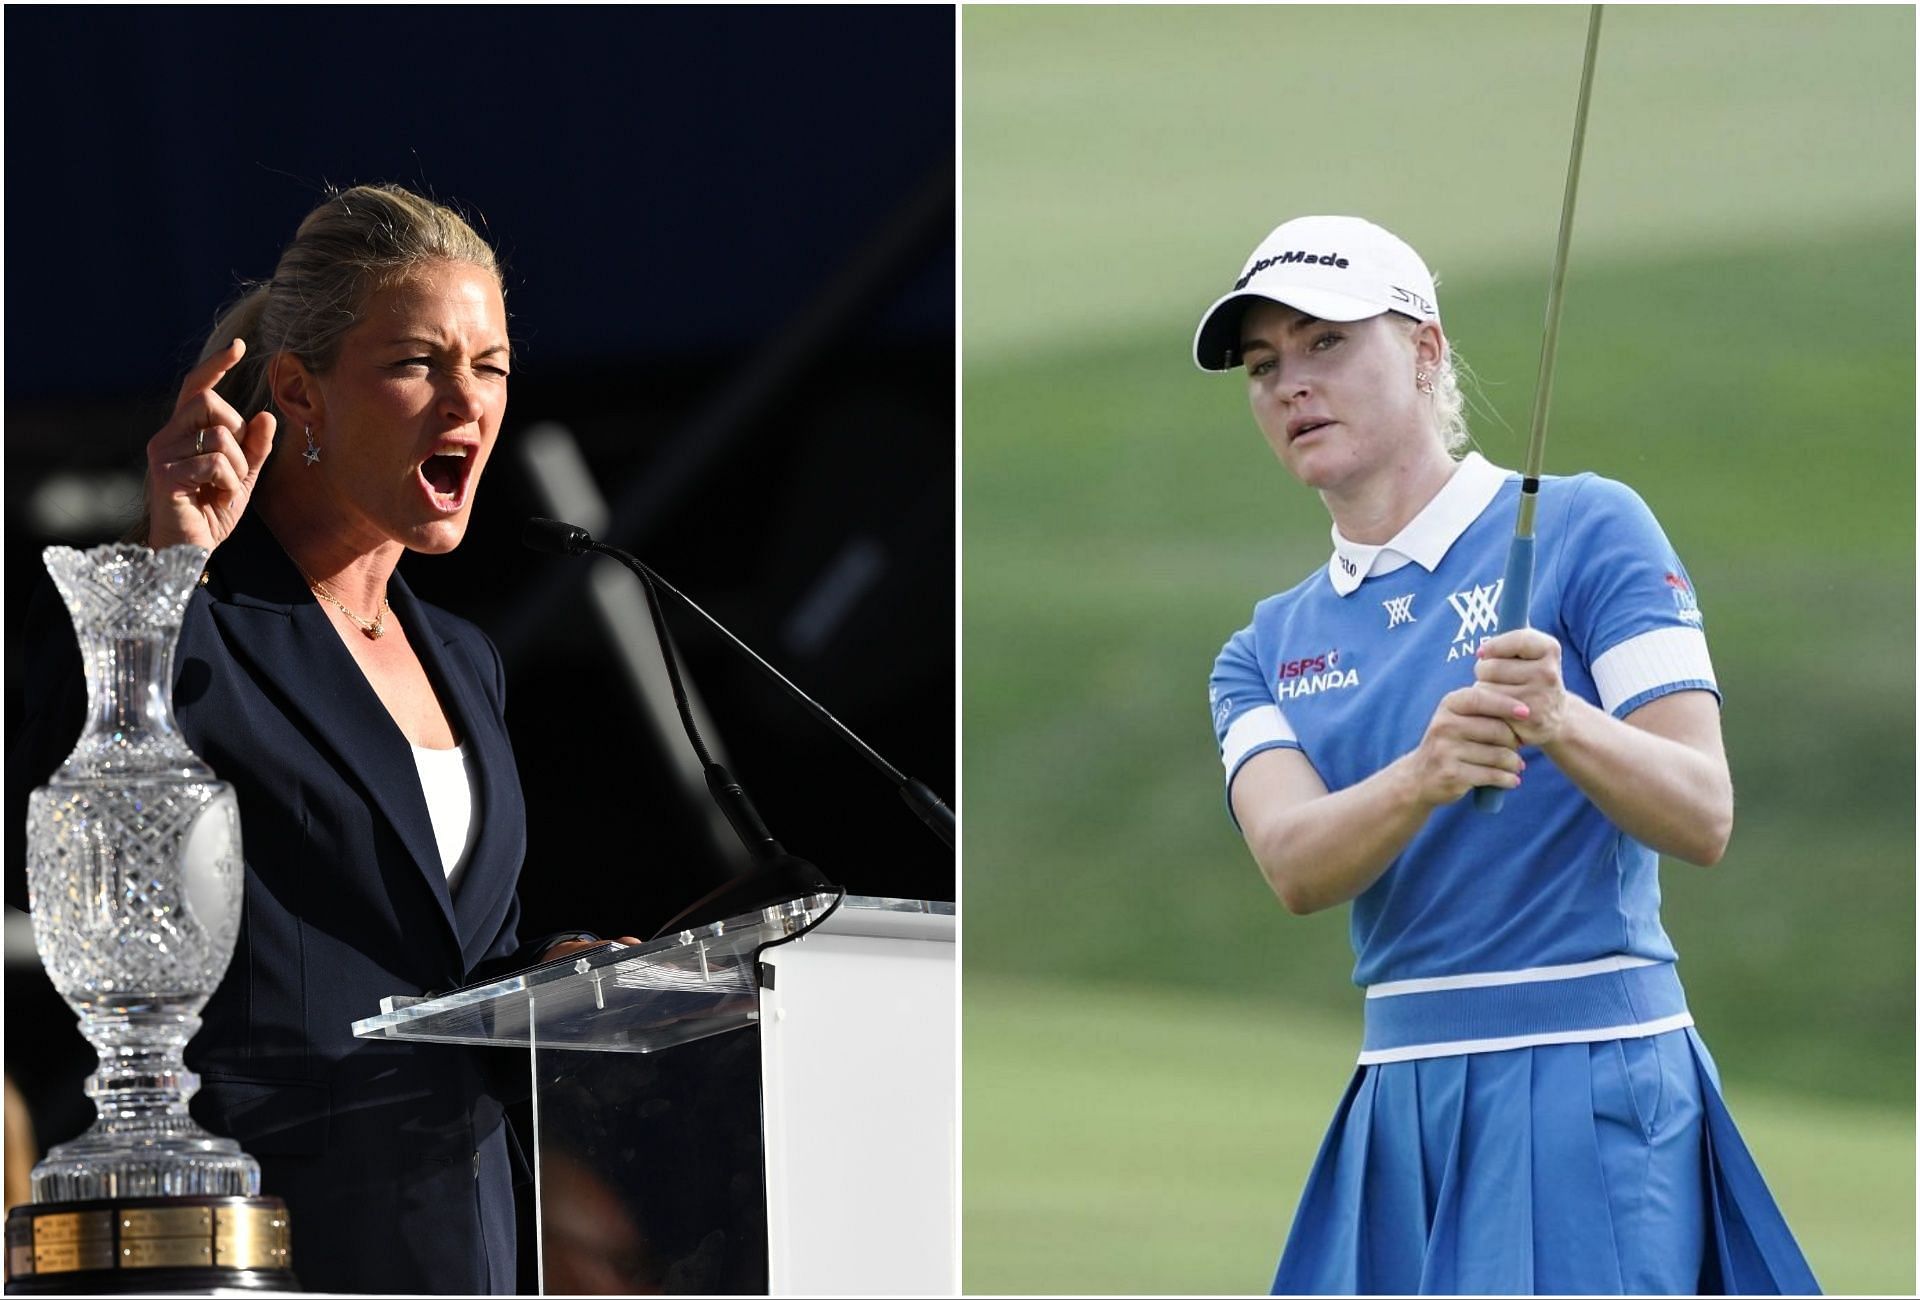 Suzann Pettersen and Charley Hull (via Getty Images)